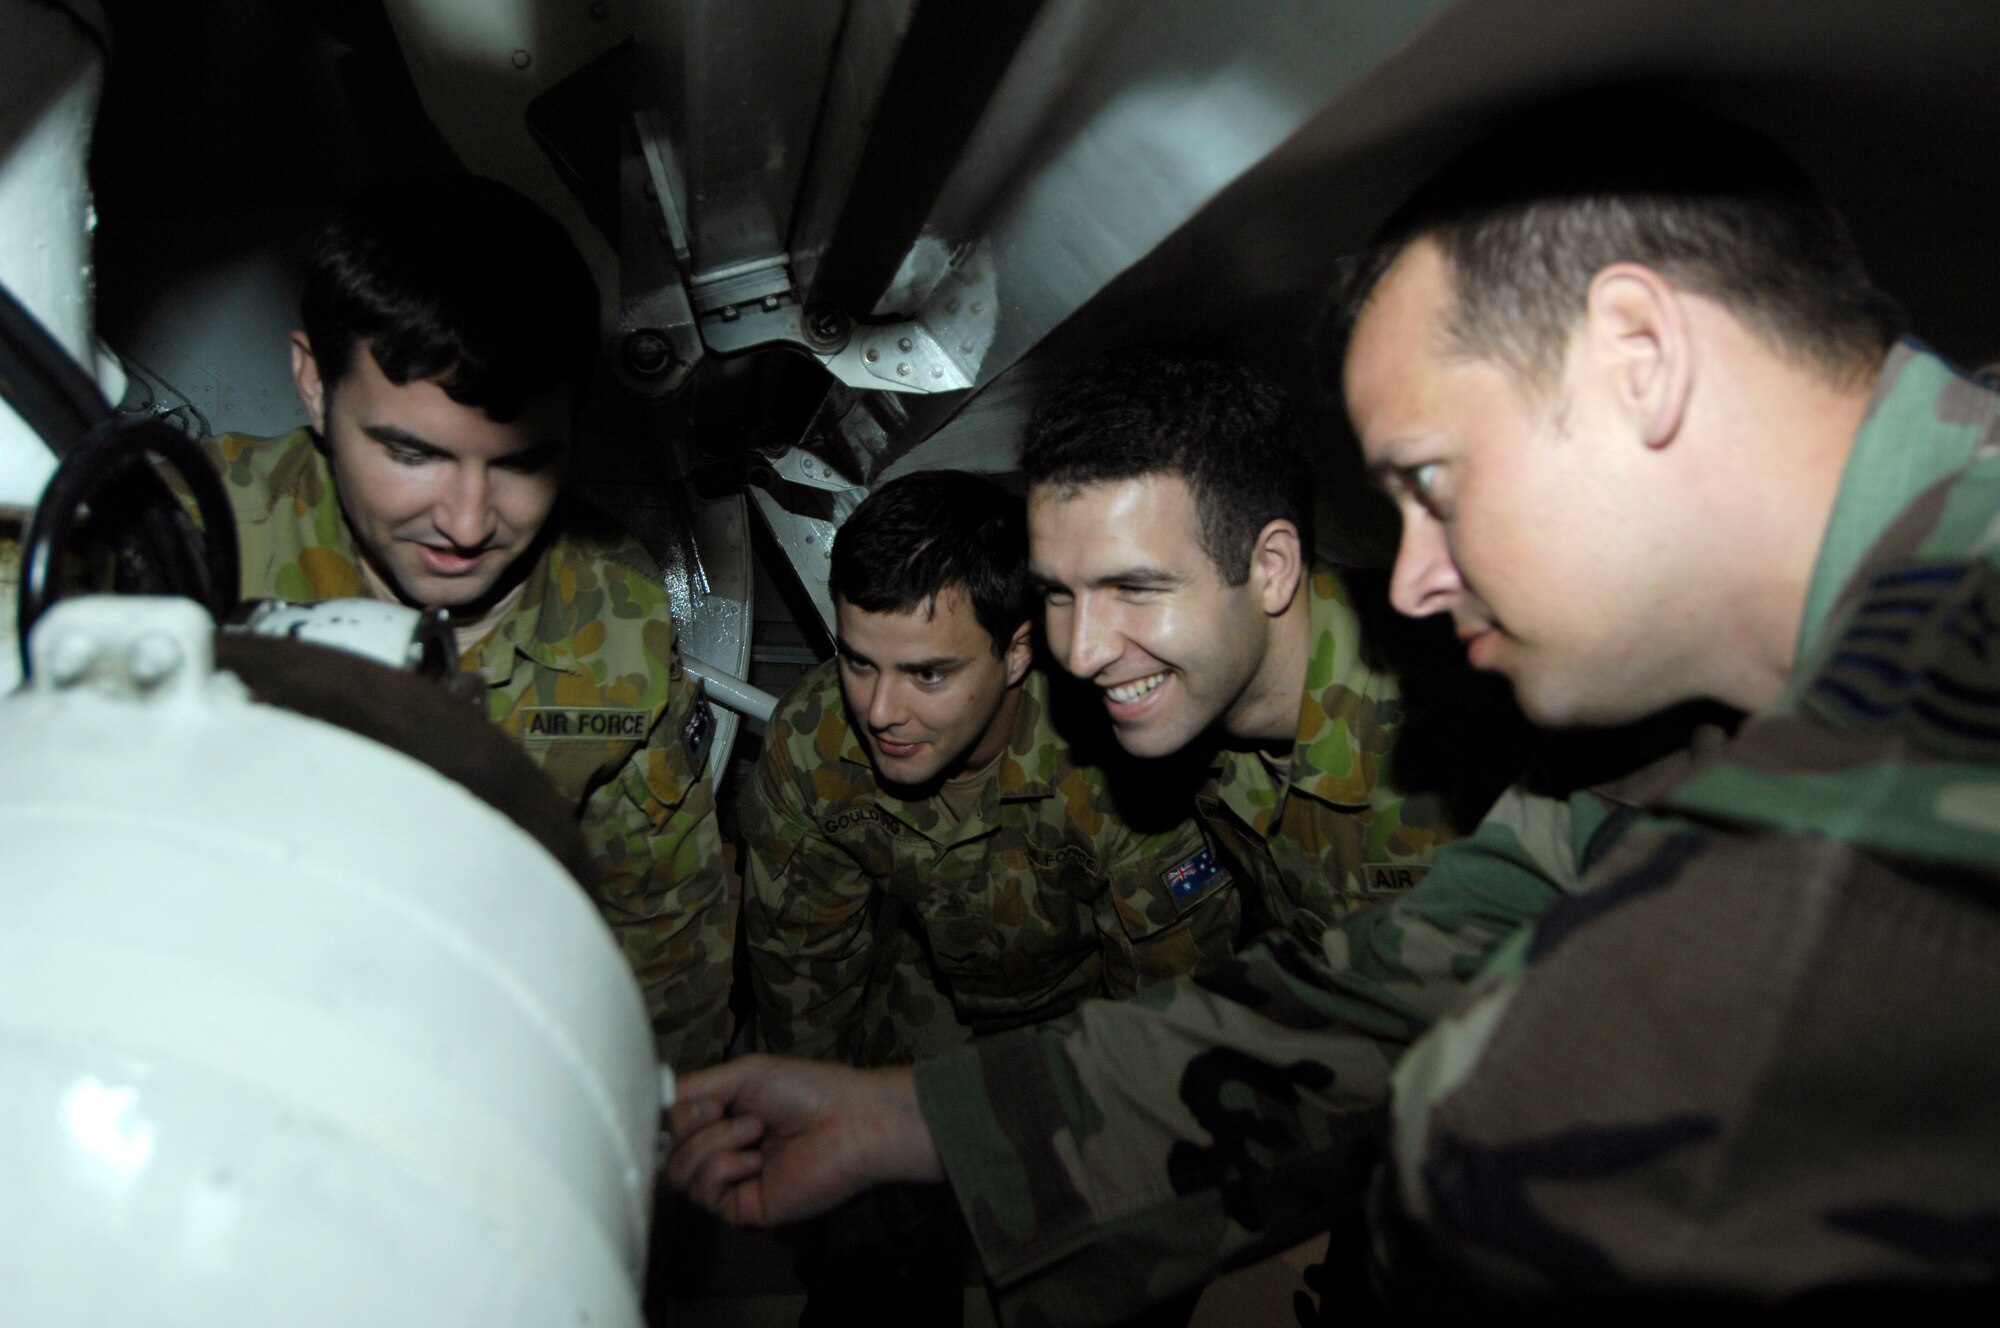 U.S. Air Force Tech. Sgt. Bryan Doughty instructs Royal Australian Airmen during a three month course on C-17 maintenance at Joint Base Charleston, S.C., June 1, 2010. The complexity of the training required for the Australian Airmen is more than twice the length of the average technical school for U.S. Air Force Airmen. Sergeant Doughty is a training instructor with the 373rd Training Squadron, Detachment 5. (U.S. Air Force/Airman 1st Class Lauren Main)